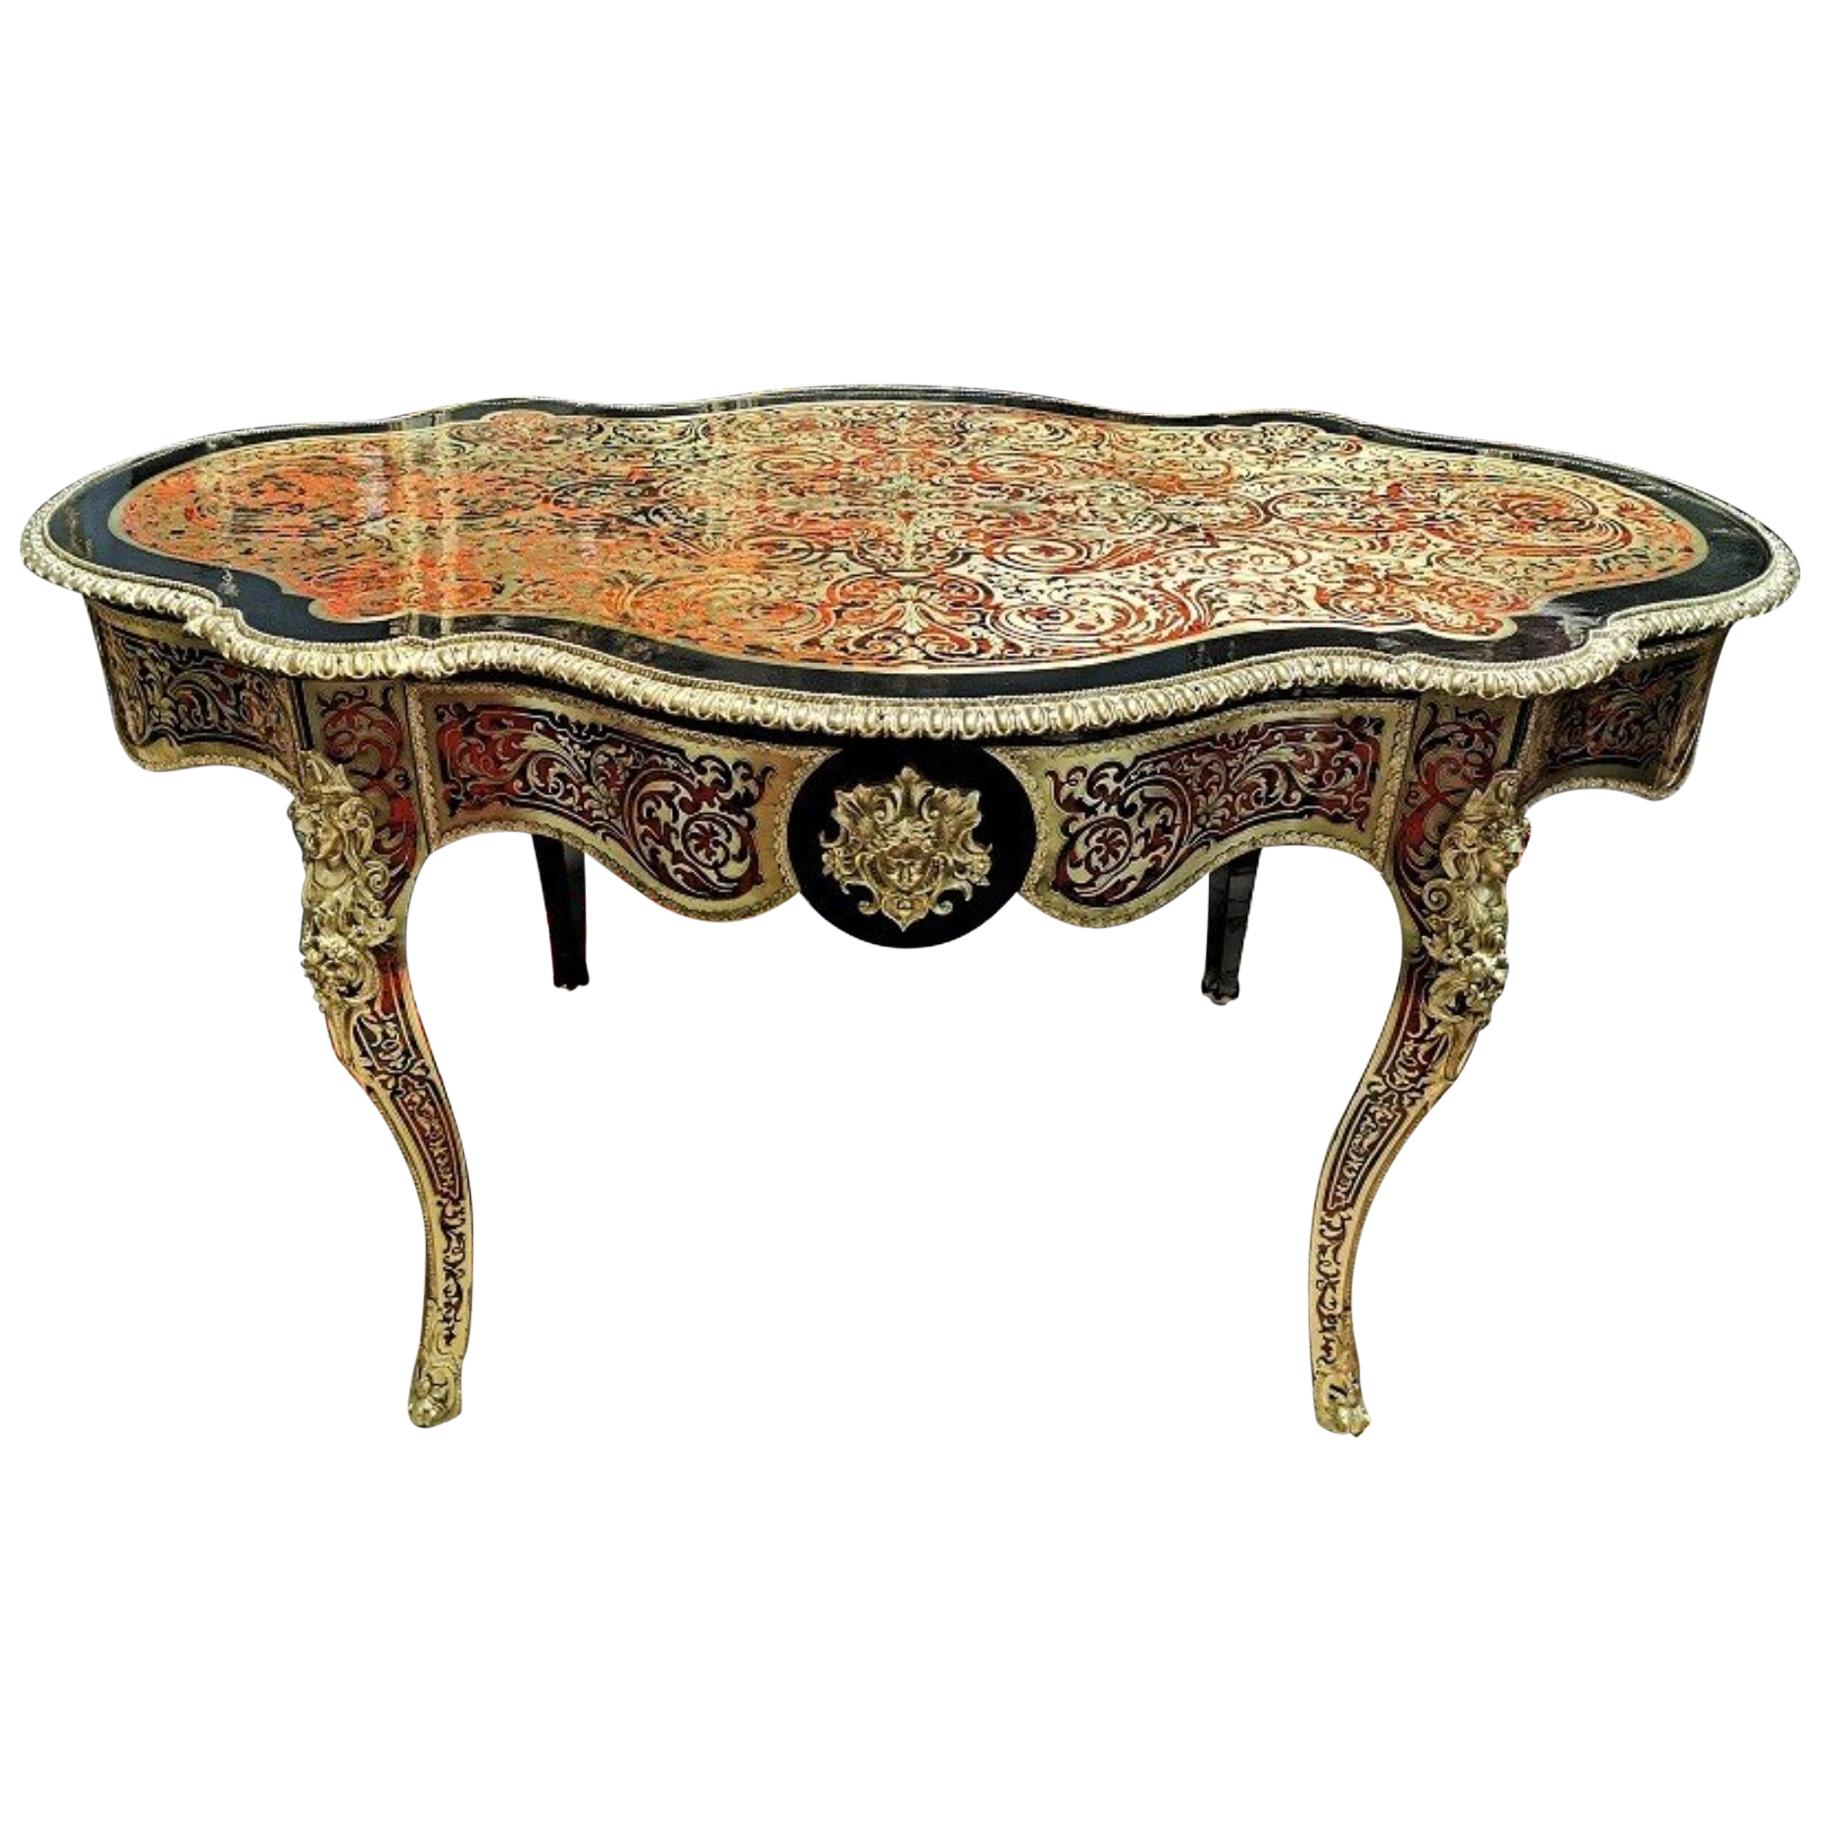 Stunning Napoleon III Large Table in Boulle Marquetry, France, 19th Century